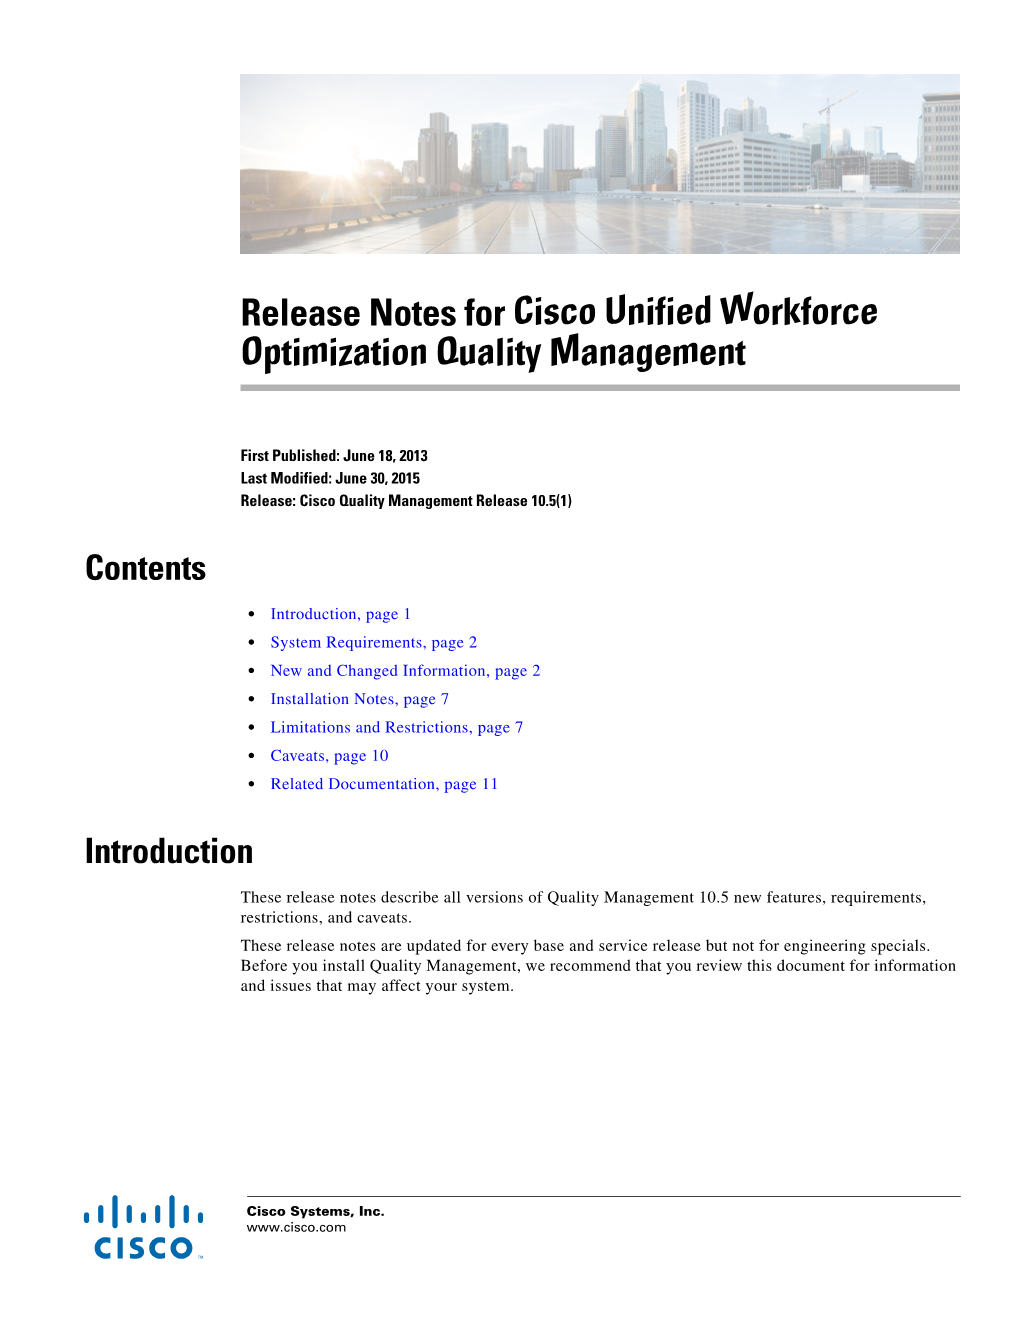 Release Notes for Cisco Unified Workforce Optimization Quality Management